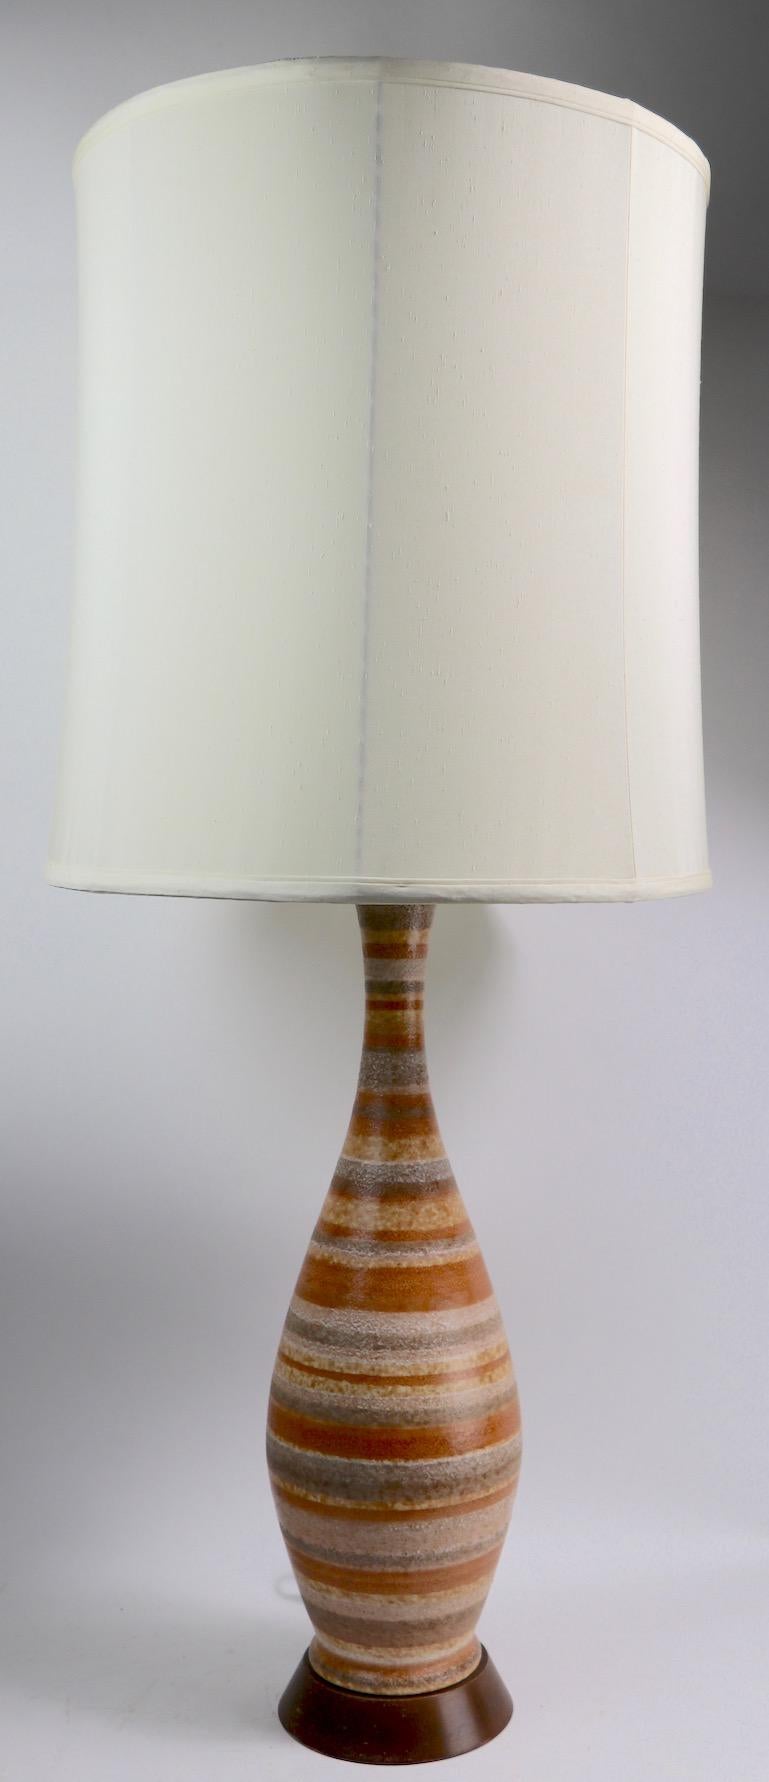 Stylish Mid-Century Modern pottery table lamp with stripped brown tone body on walnut plinth base. Original, clean and working condition, includes original turned wood finial, shade not included. Currently wired to accept a standard size screw in